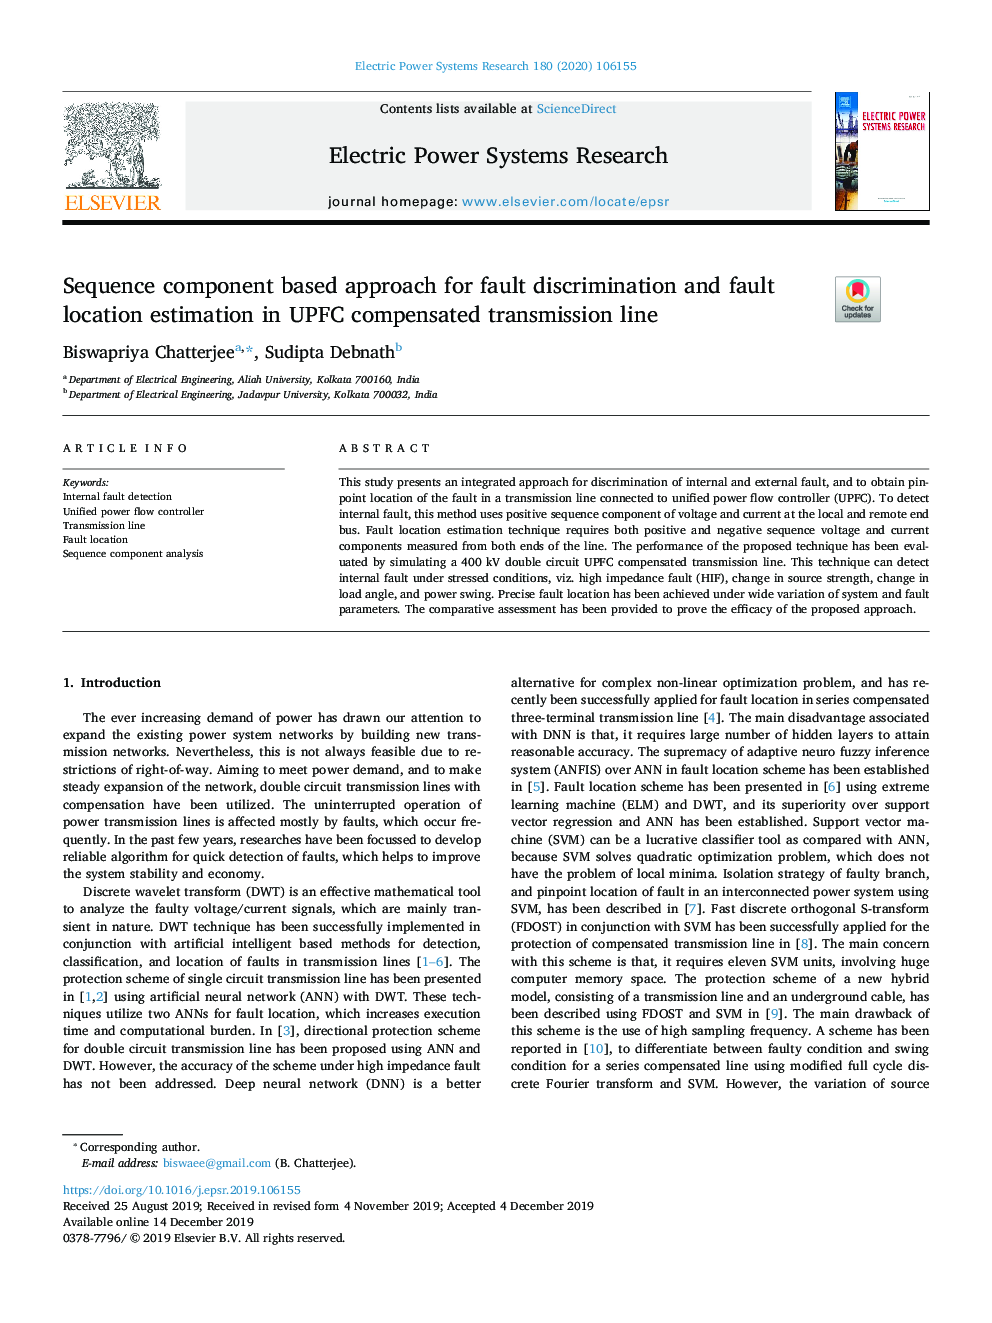 Sequence component based approach for fault discrimination and fault location estimation in UPFC compensated transmission line